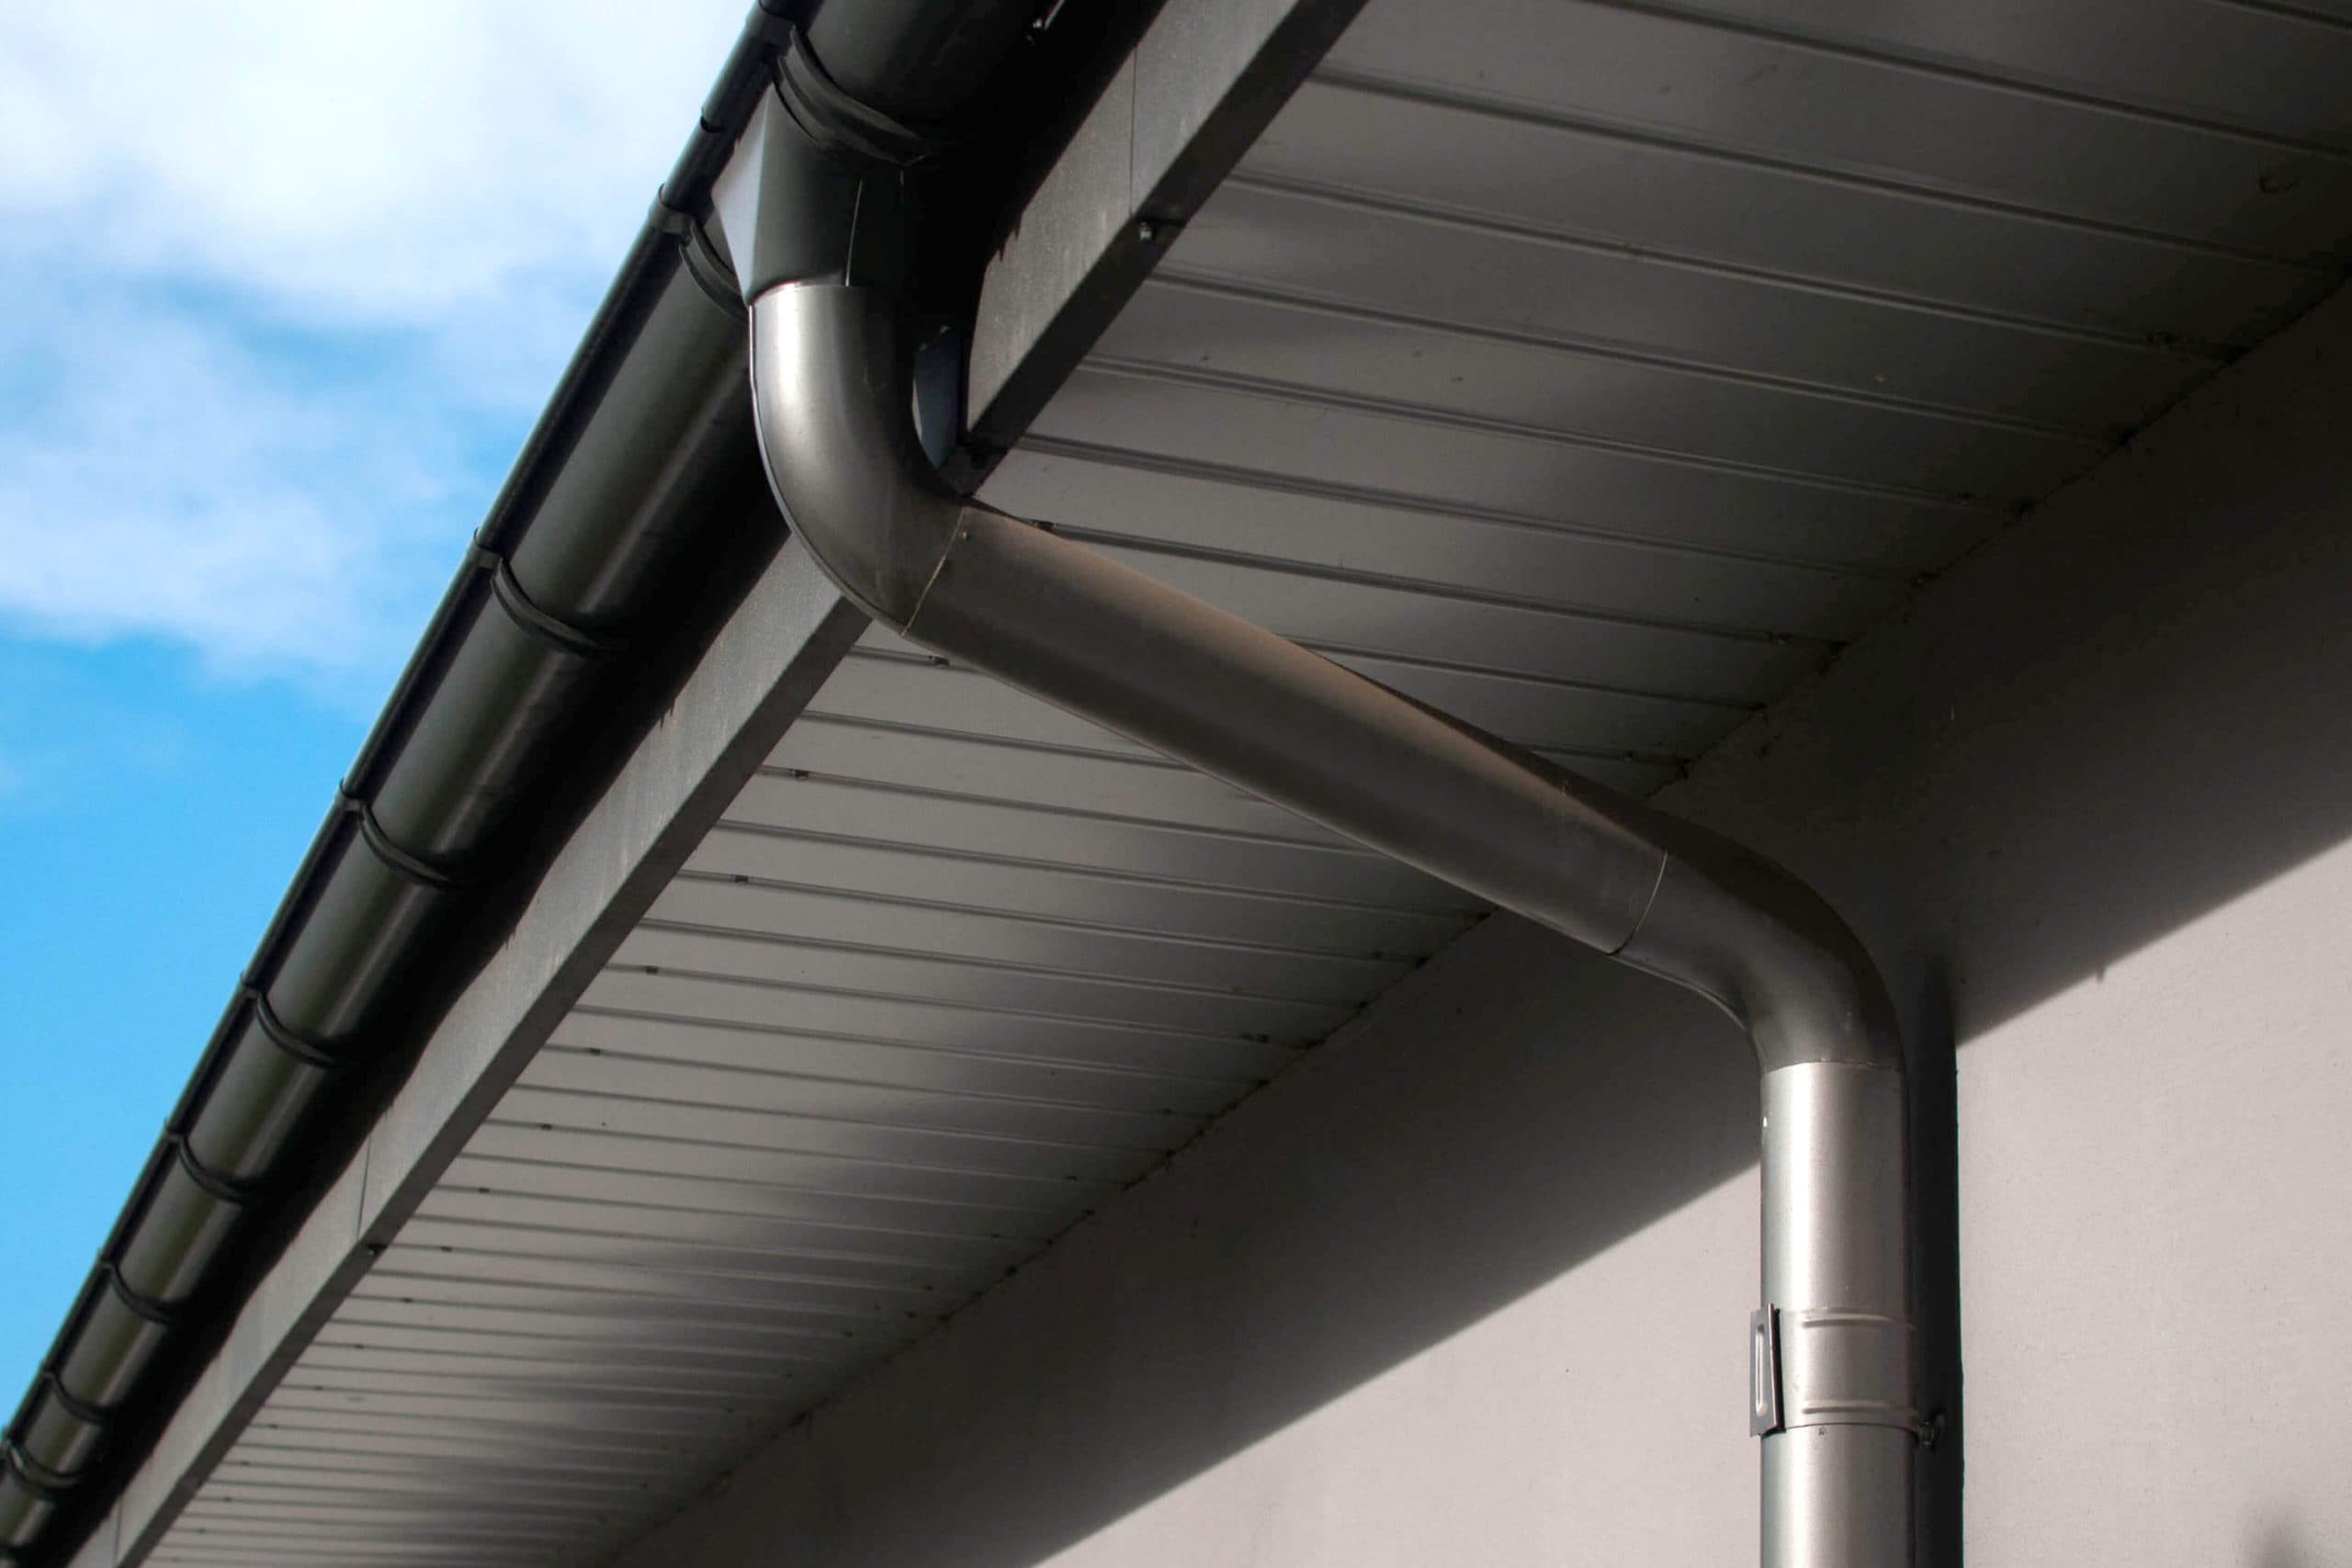 Reliable and affordable Galvanized gutters installation in Portland